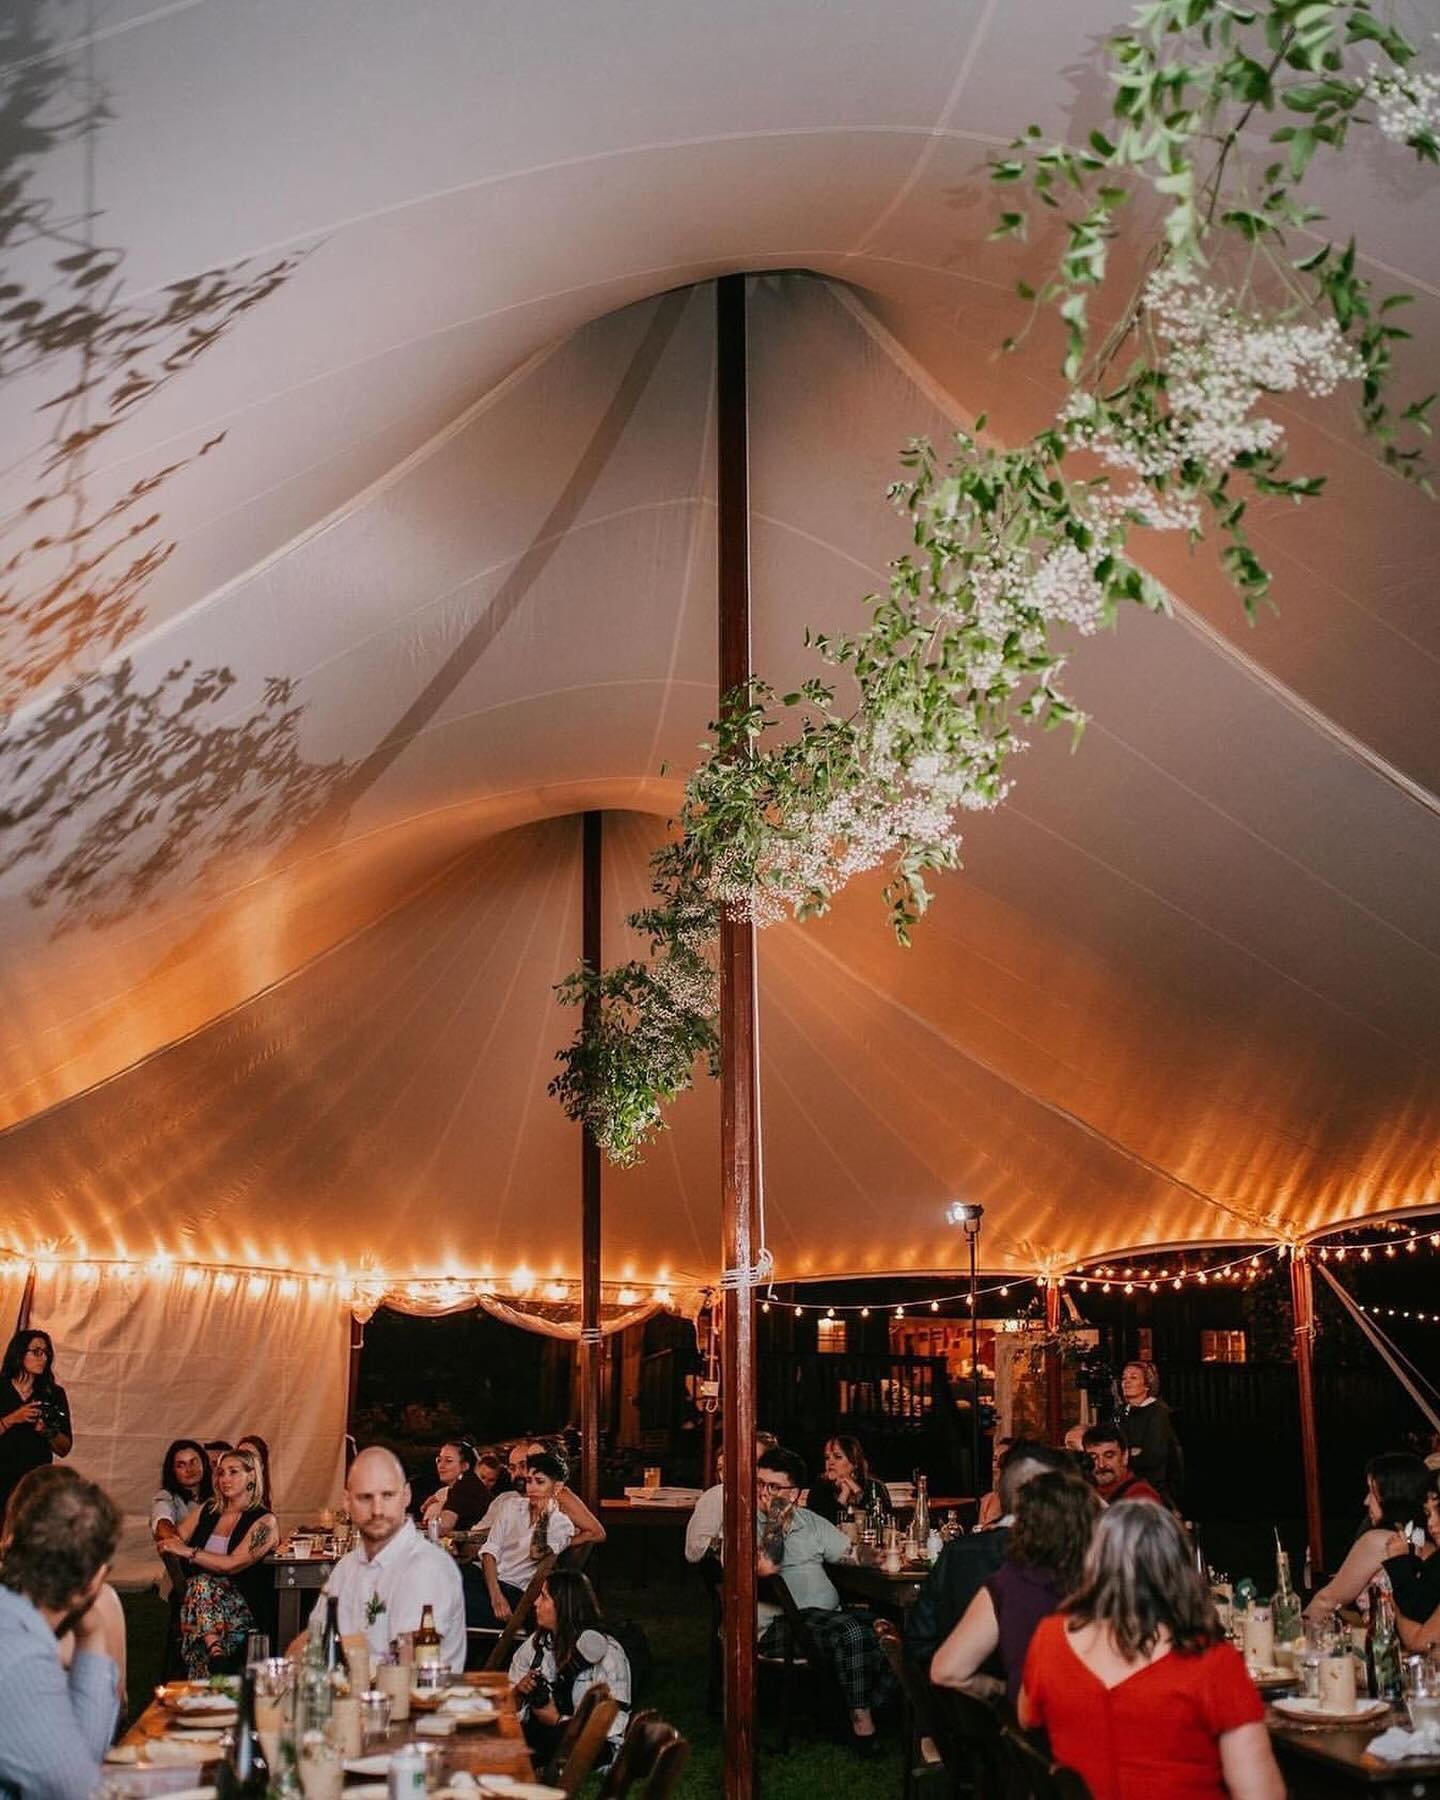 April Showers bring May Flowers! And as we look at all the amazing bouquets and centerpieces this month, we wanted to turn your attention upward to the installations! Like this amazing sailcloth stringer by @bountyoblooms! Floral installations can re